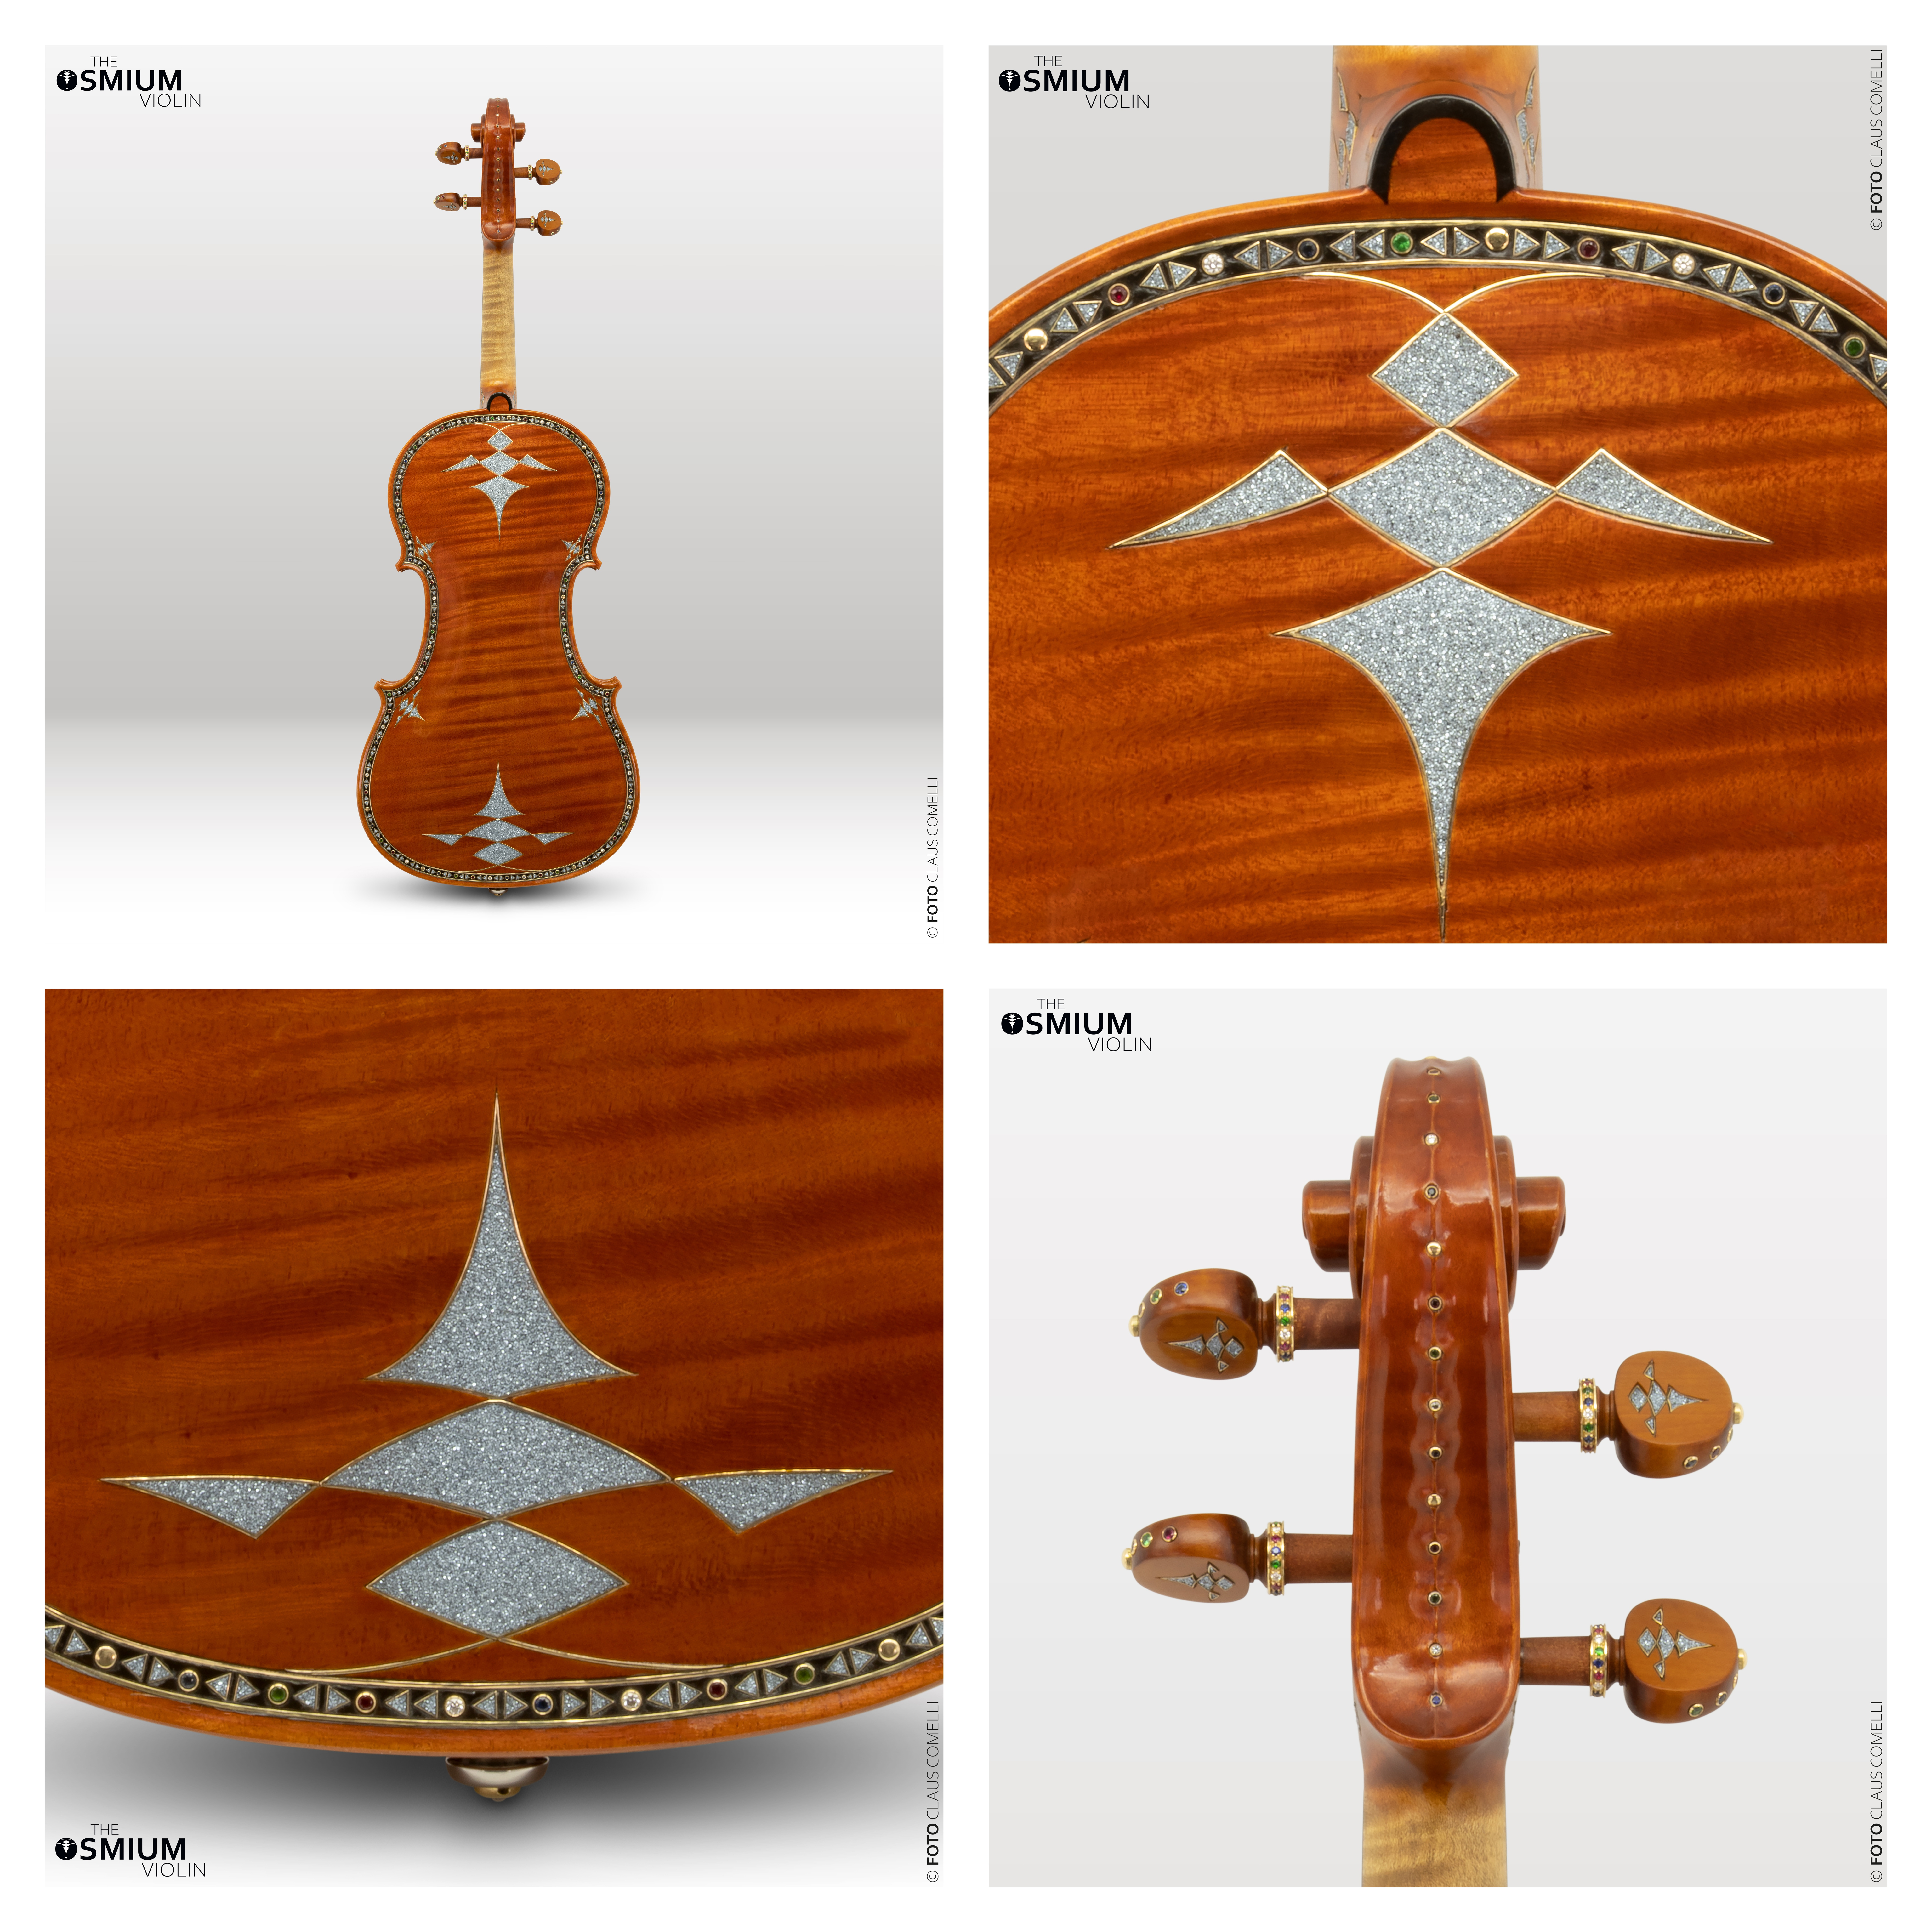 Osmium-ART Announces the Sale of the World’s Most Expensive Modern Violin as a Phygital Asset on Rarible, Powered by OwnerChip